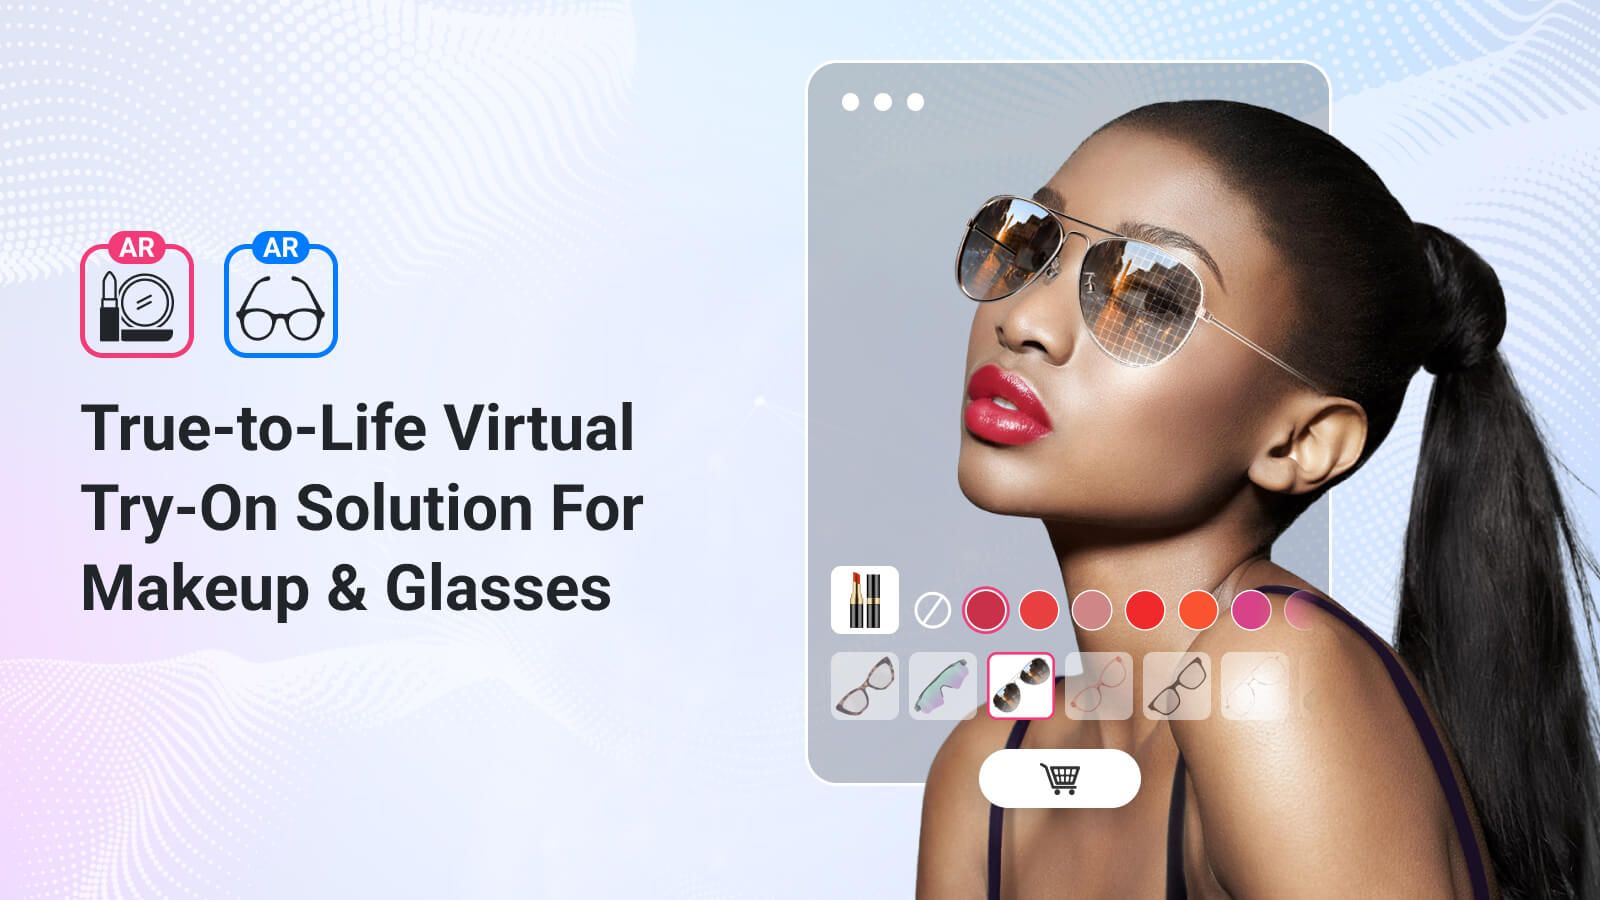 True-to-Life Virtual Try-On Solution For Makeup & Glasses